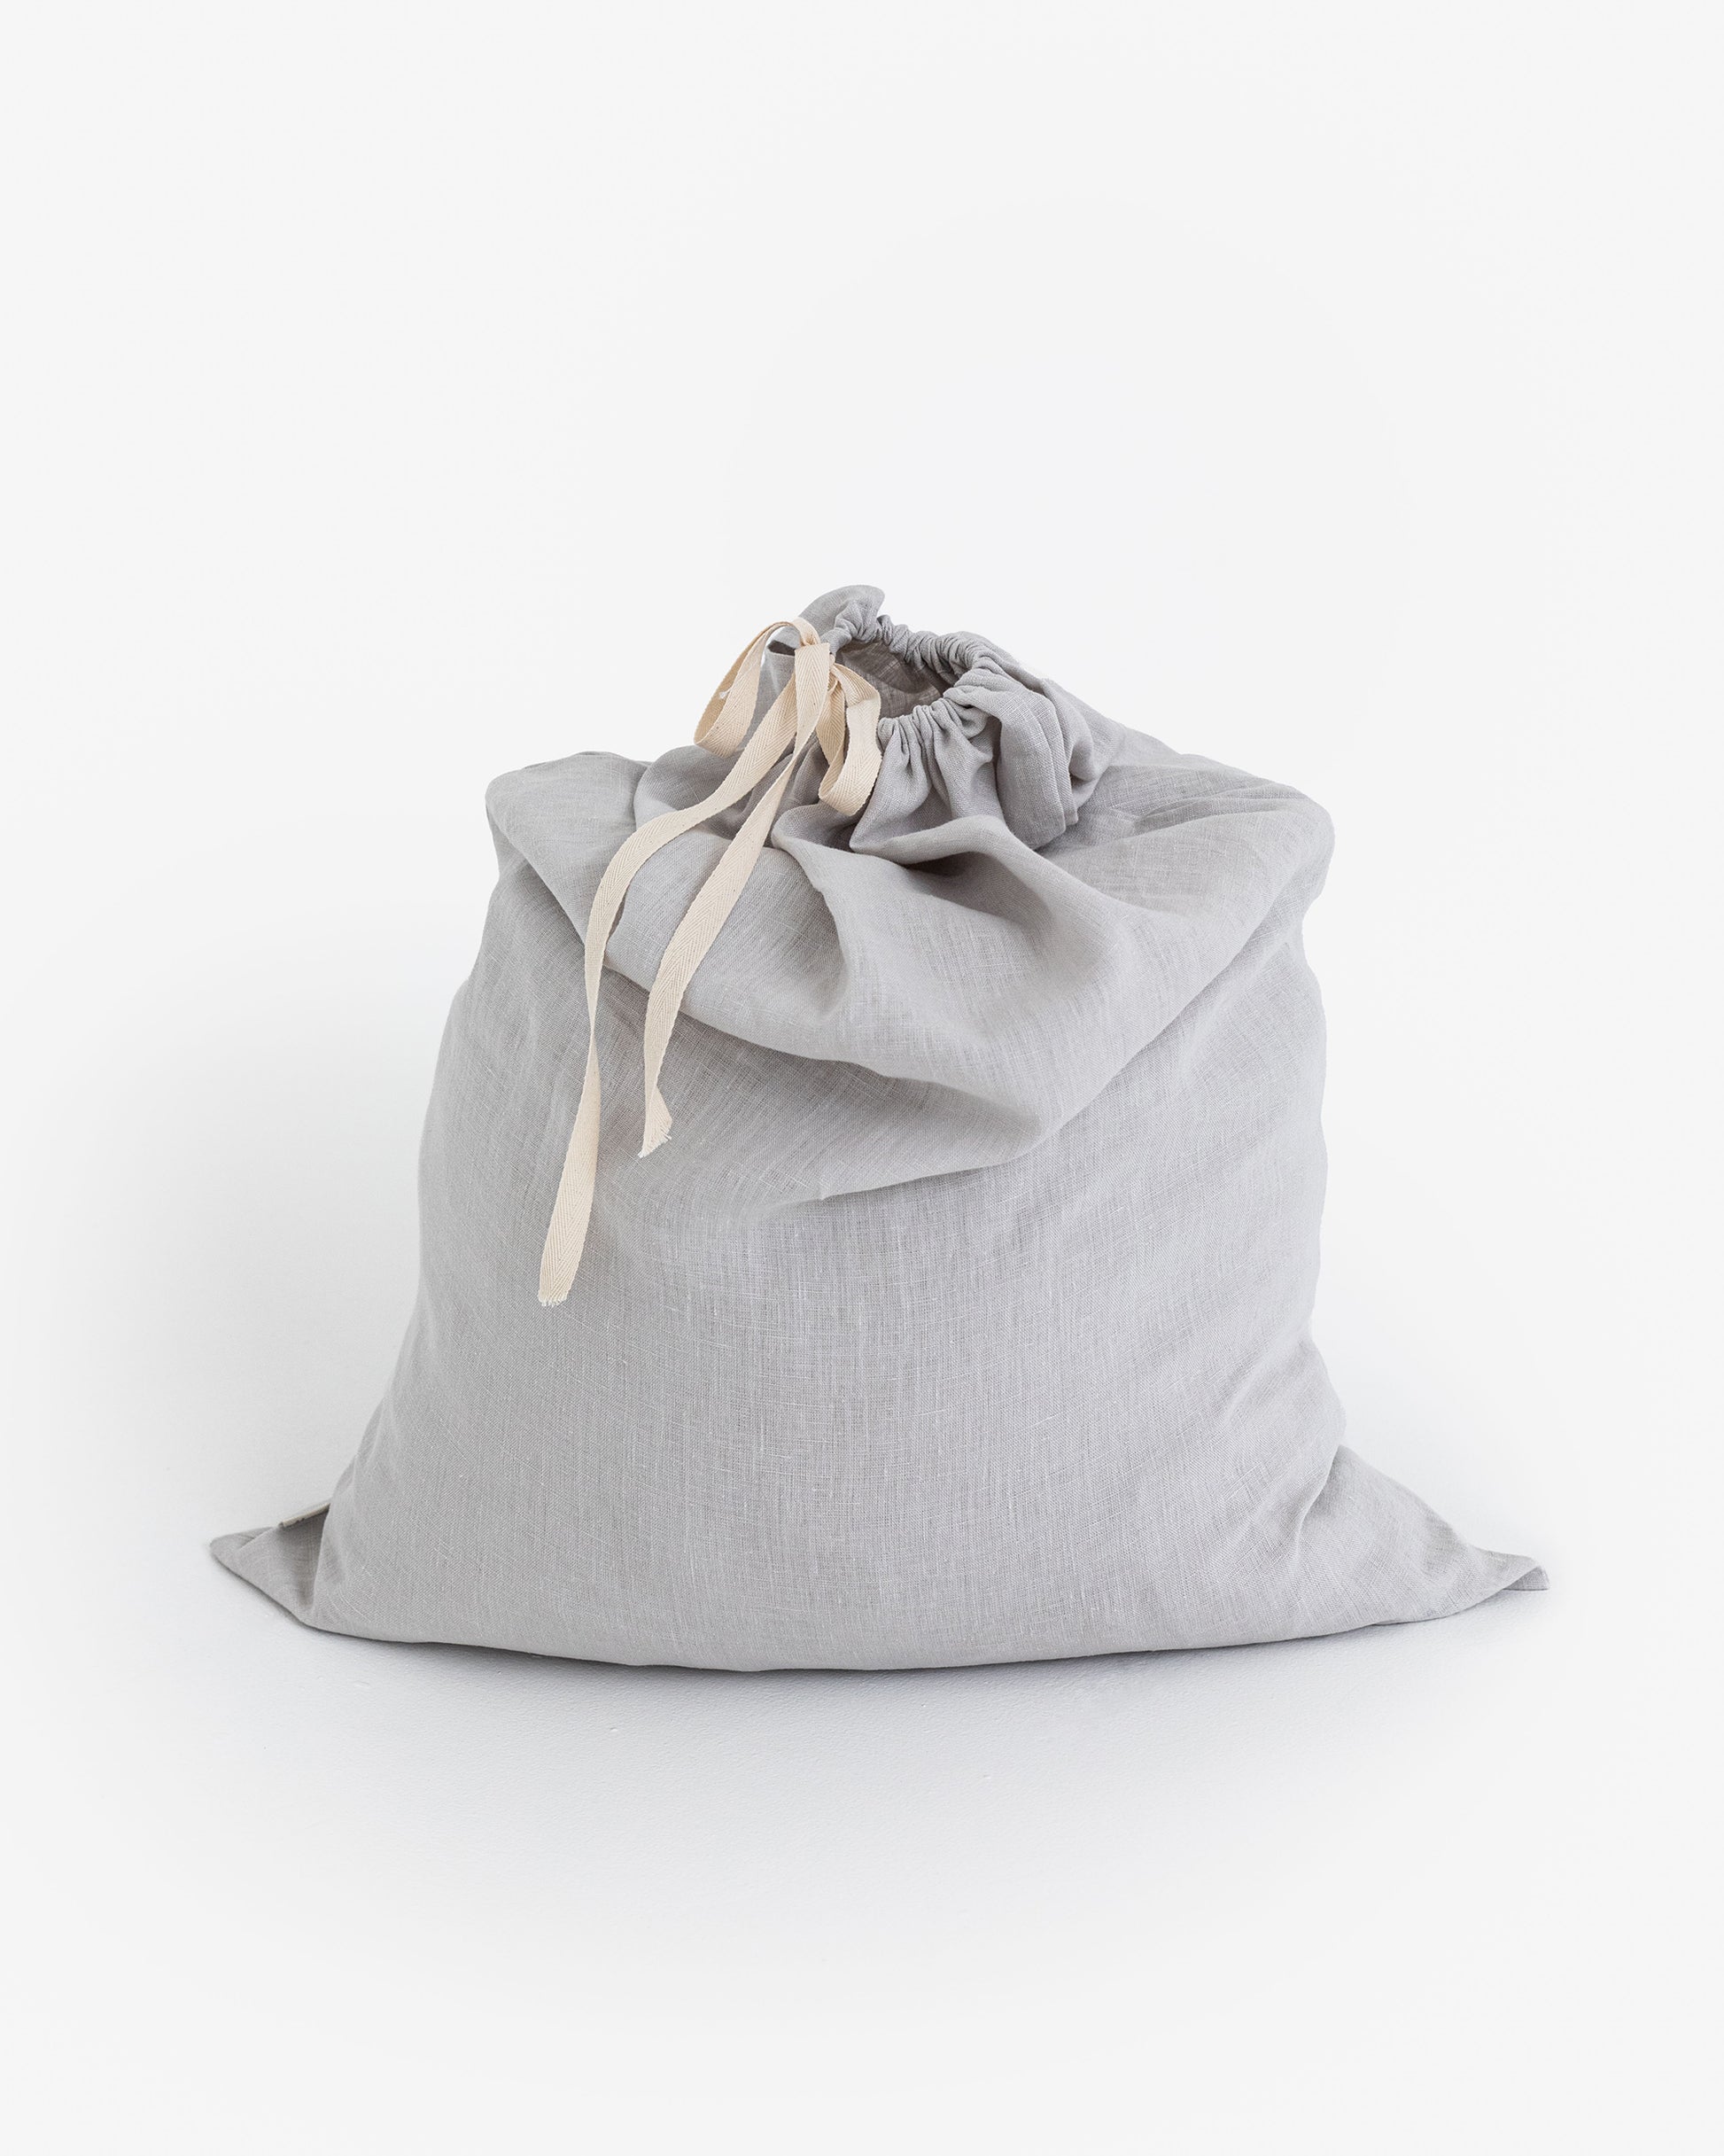 MagicLinen Laundry Bag in Light Gray at Urban Outfitters